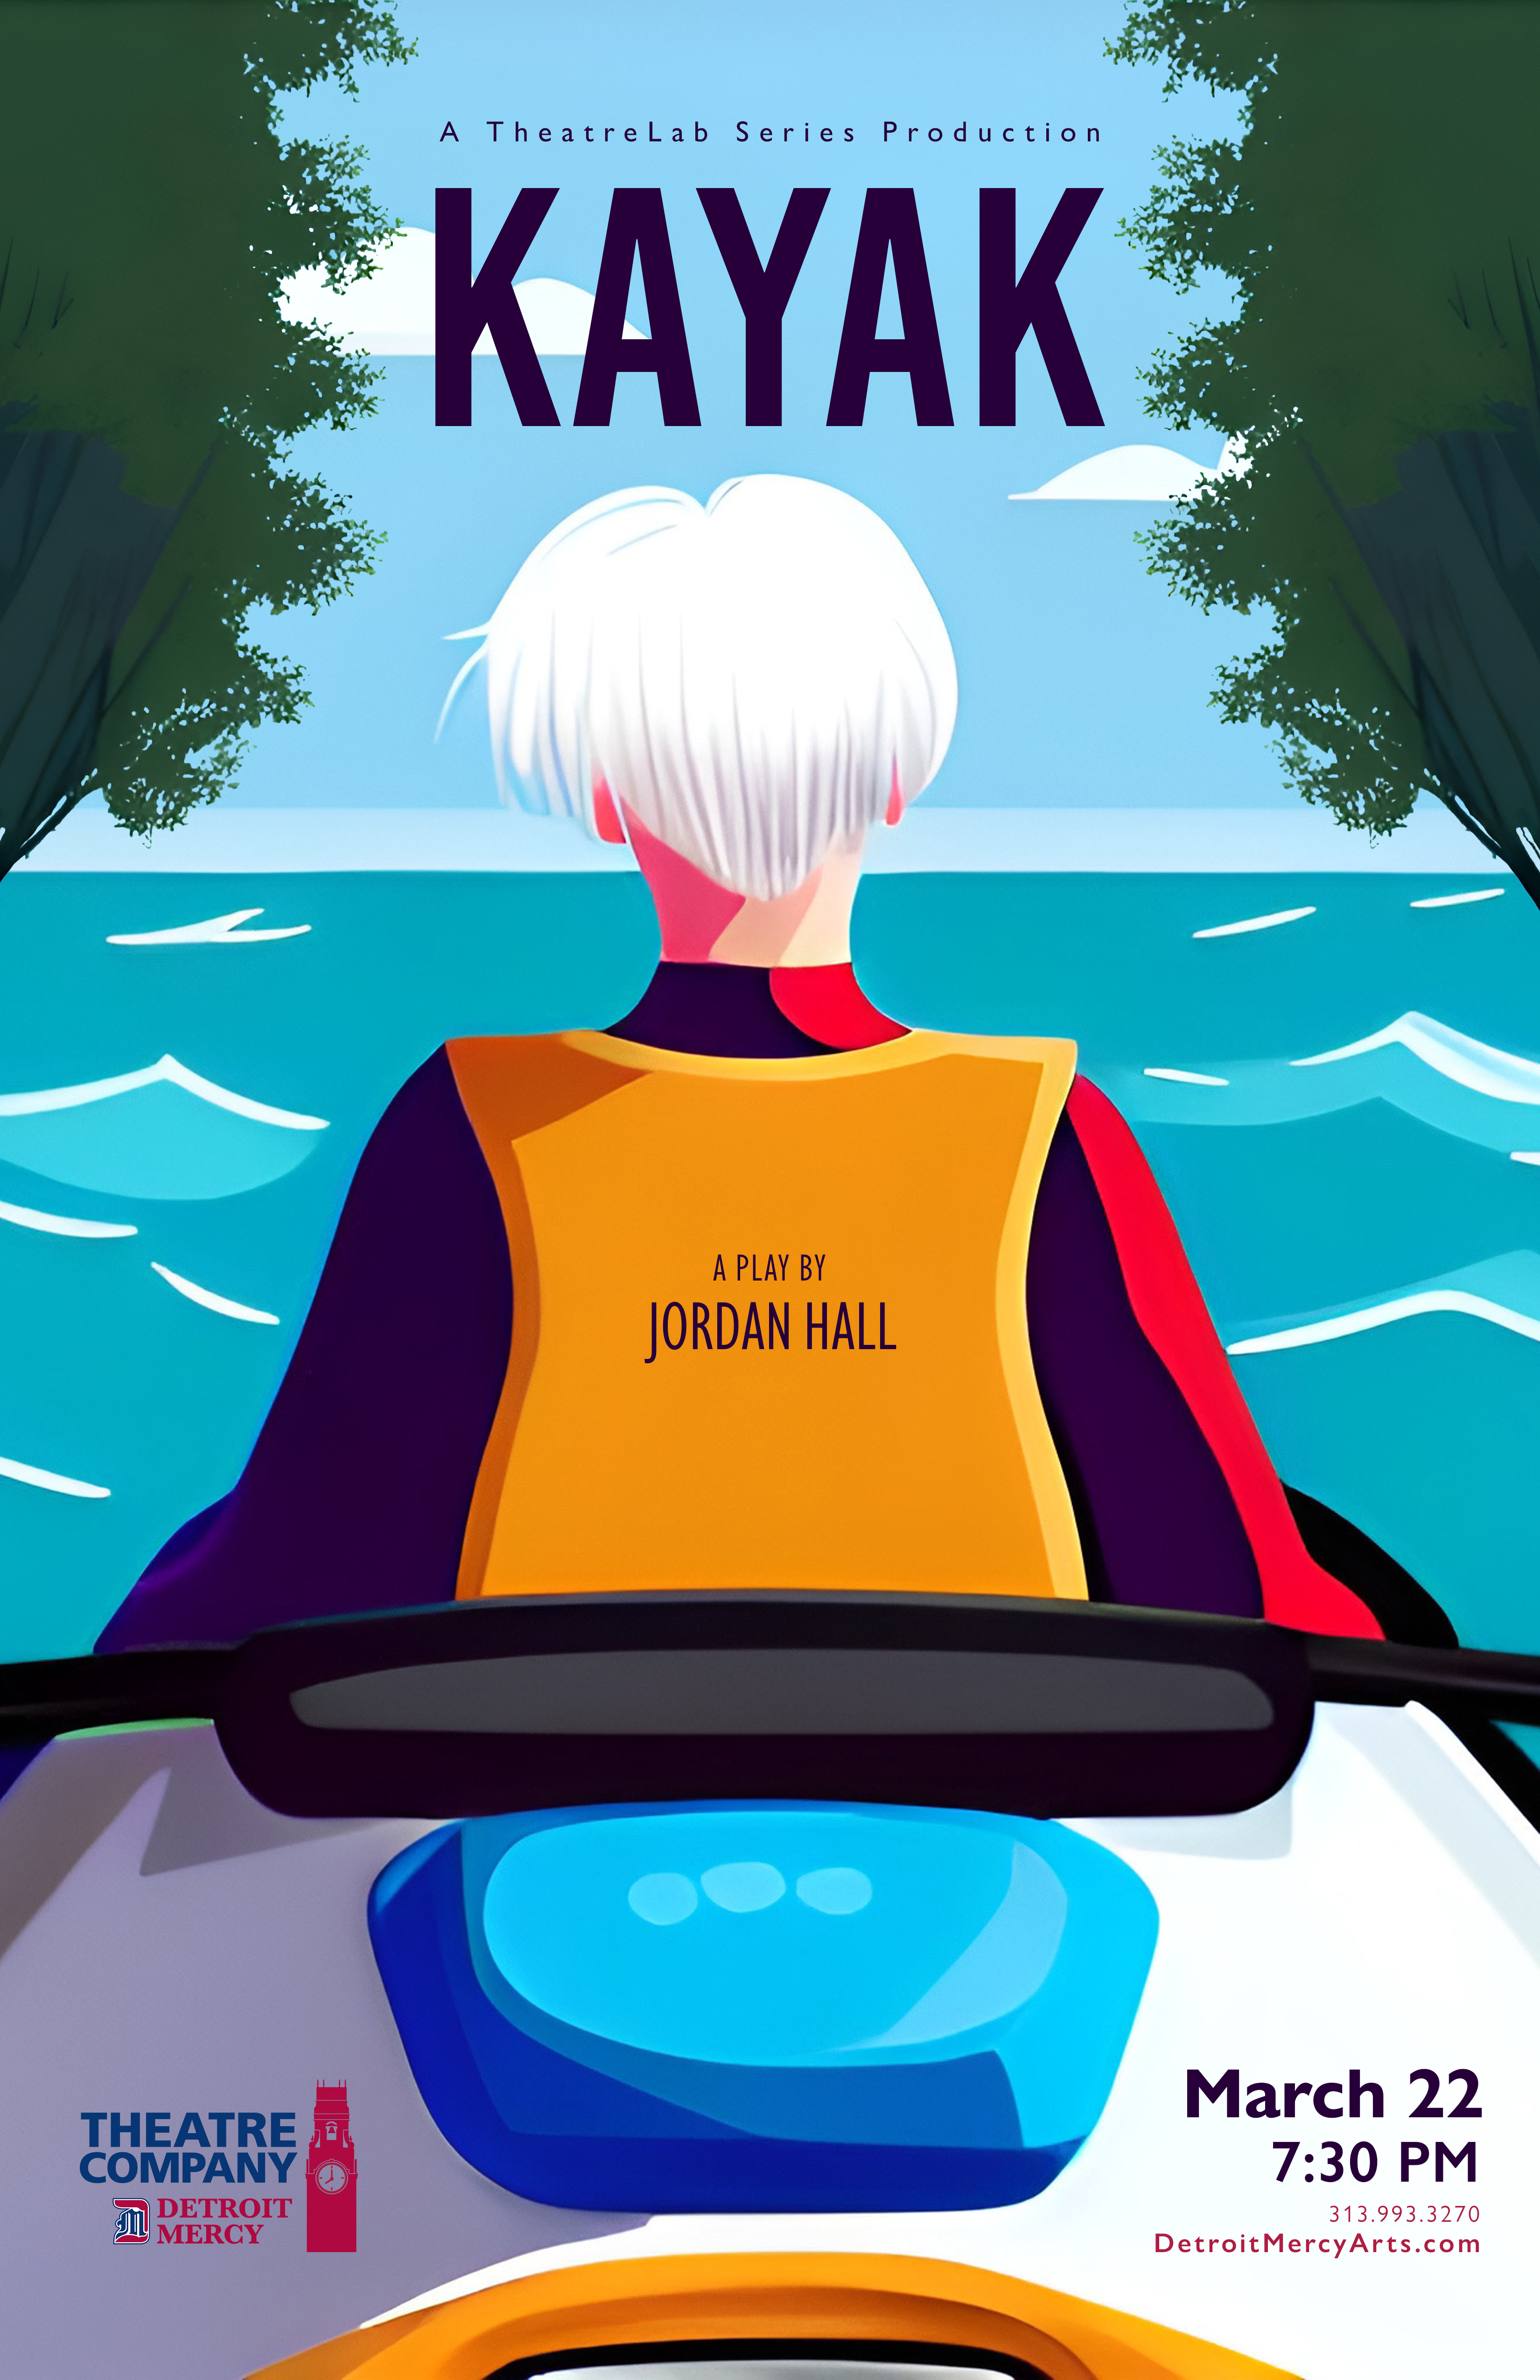 An image of a person in a kayak looking at open water, and text that reads: A TheatreLab Series Production: Kayak. By Jordan Hall. March 22. 7:30pm. 313.993.3270. DetroitMercyArts.com. The Detroit Mercy Theatre Company logo.